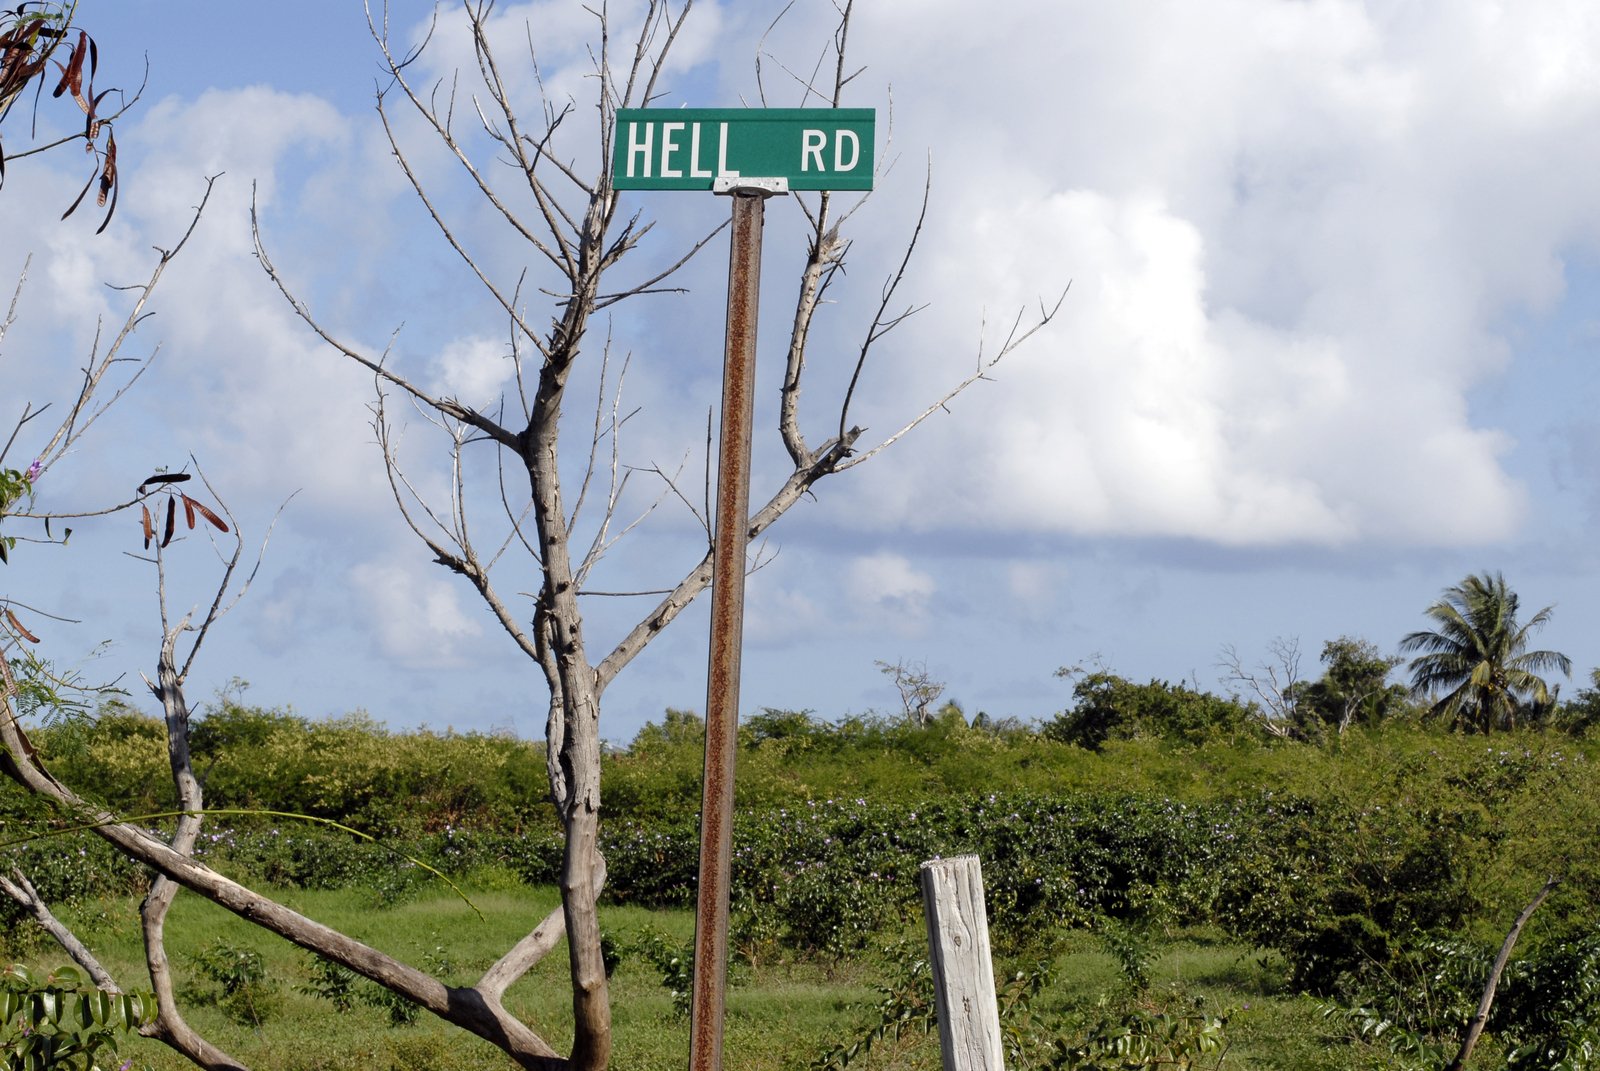 the sign for hell road is hanging on a metal pole